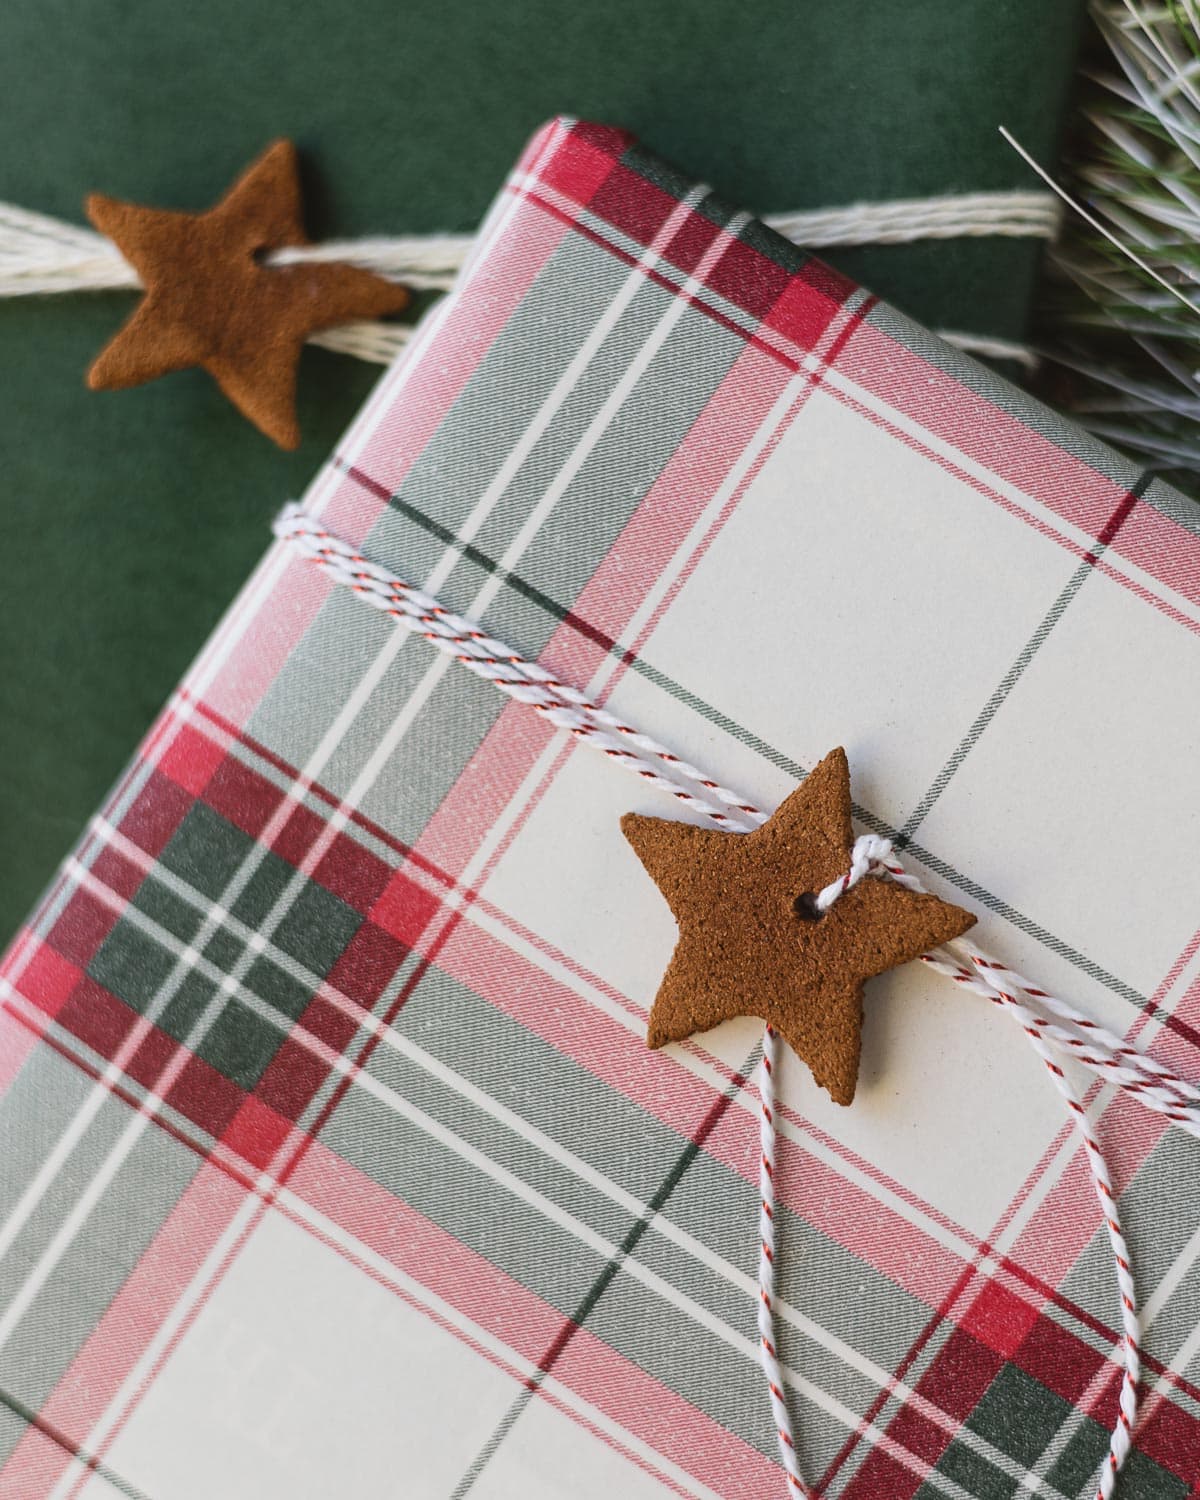 A cinnamon ornament start cutout wrapped around a plaid package.